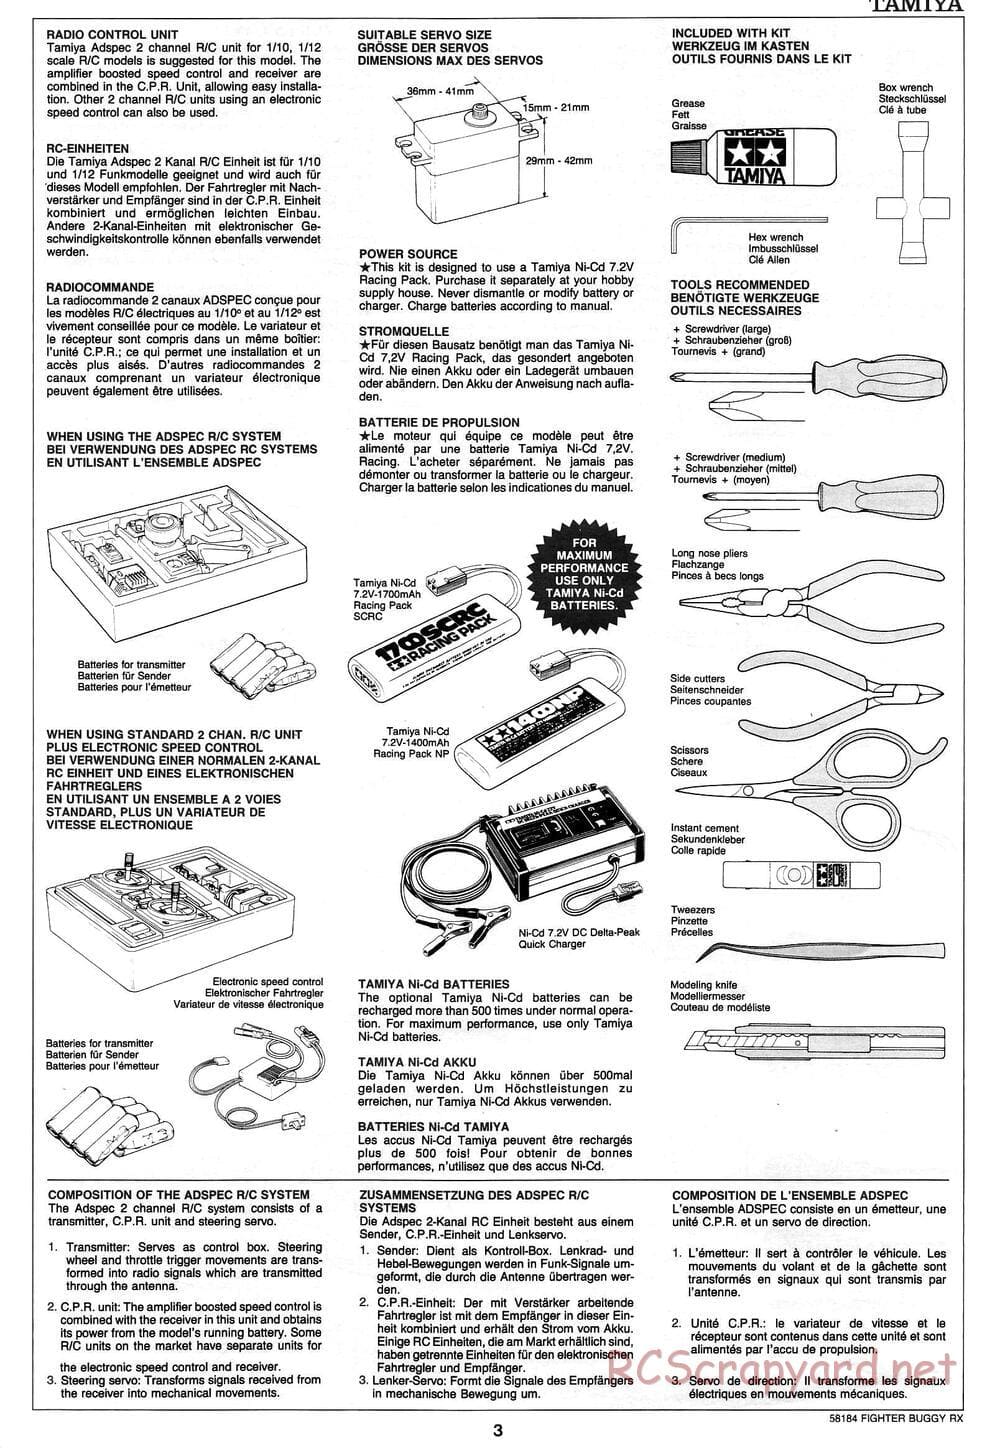 Tamiya - Fighter Buggy RX Chassis - Manual - Page 3